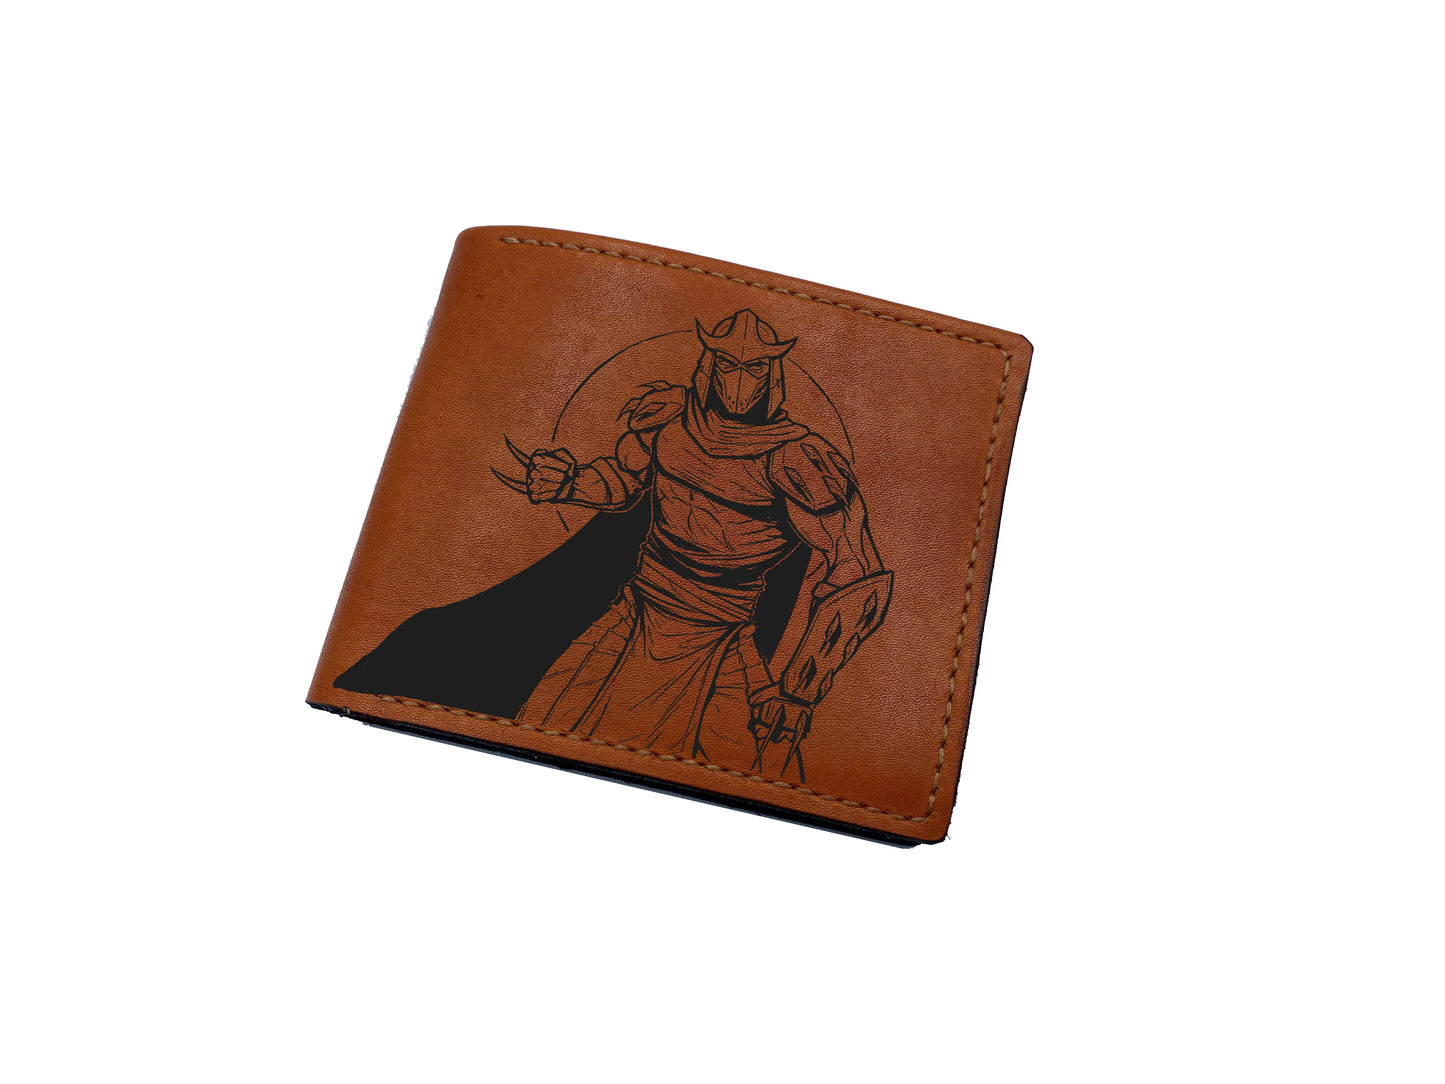 Mayan Corner - Personalized genuine leather handmade wallet, leather gift ideas for him, ninja turtle leather art wallet - 01112210